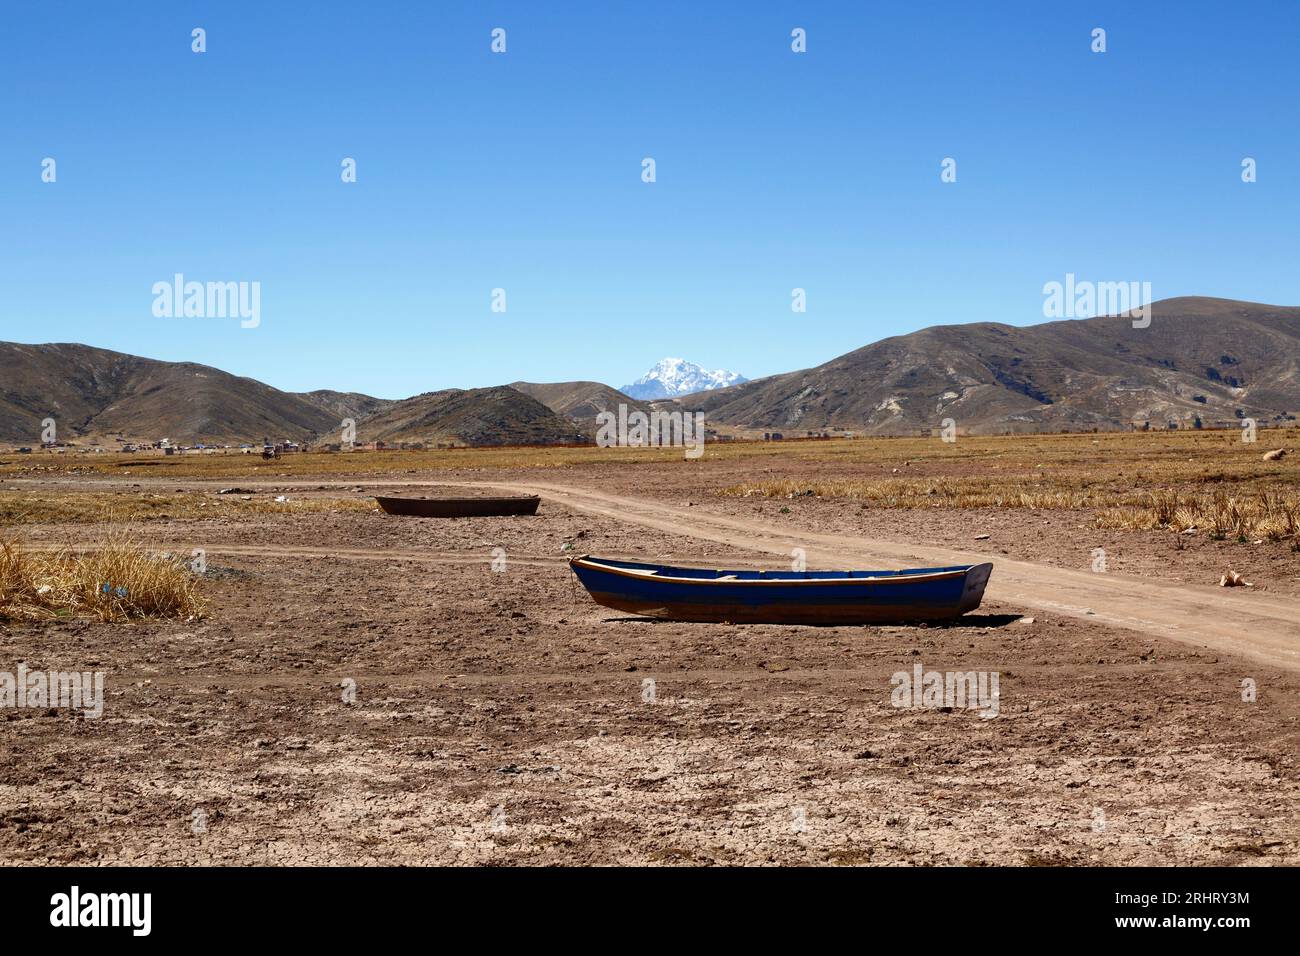 Lake Titicaca, BOLIVIA; August 18th 2023: Wooden rowing boats on the dried up shore of Cohana Bay on the Inner Lake / Huiñay Marka (the smaller part of Lake Titicaca) near the village of Cohana. In the background is Mt Huayna Potosi (6088m) in the Cordillera Real range of the Andes. Water levels in Lake Titicaca are approaching the record low level set in 1996, the lowest since Bolivia's weather service (Senhami) started keeping records in 1974. Many are blaming climate change; the last few years have been drier than normal and El Niño is currently strengthening in the Pacific Ocean off South Stock Photo